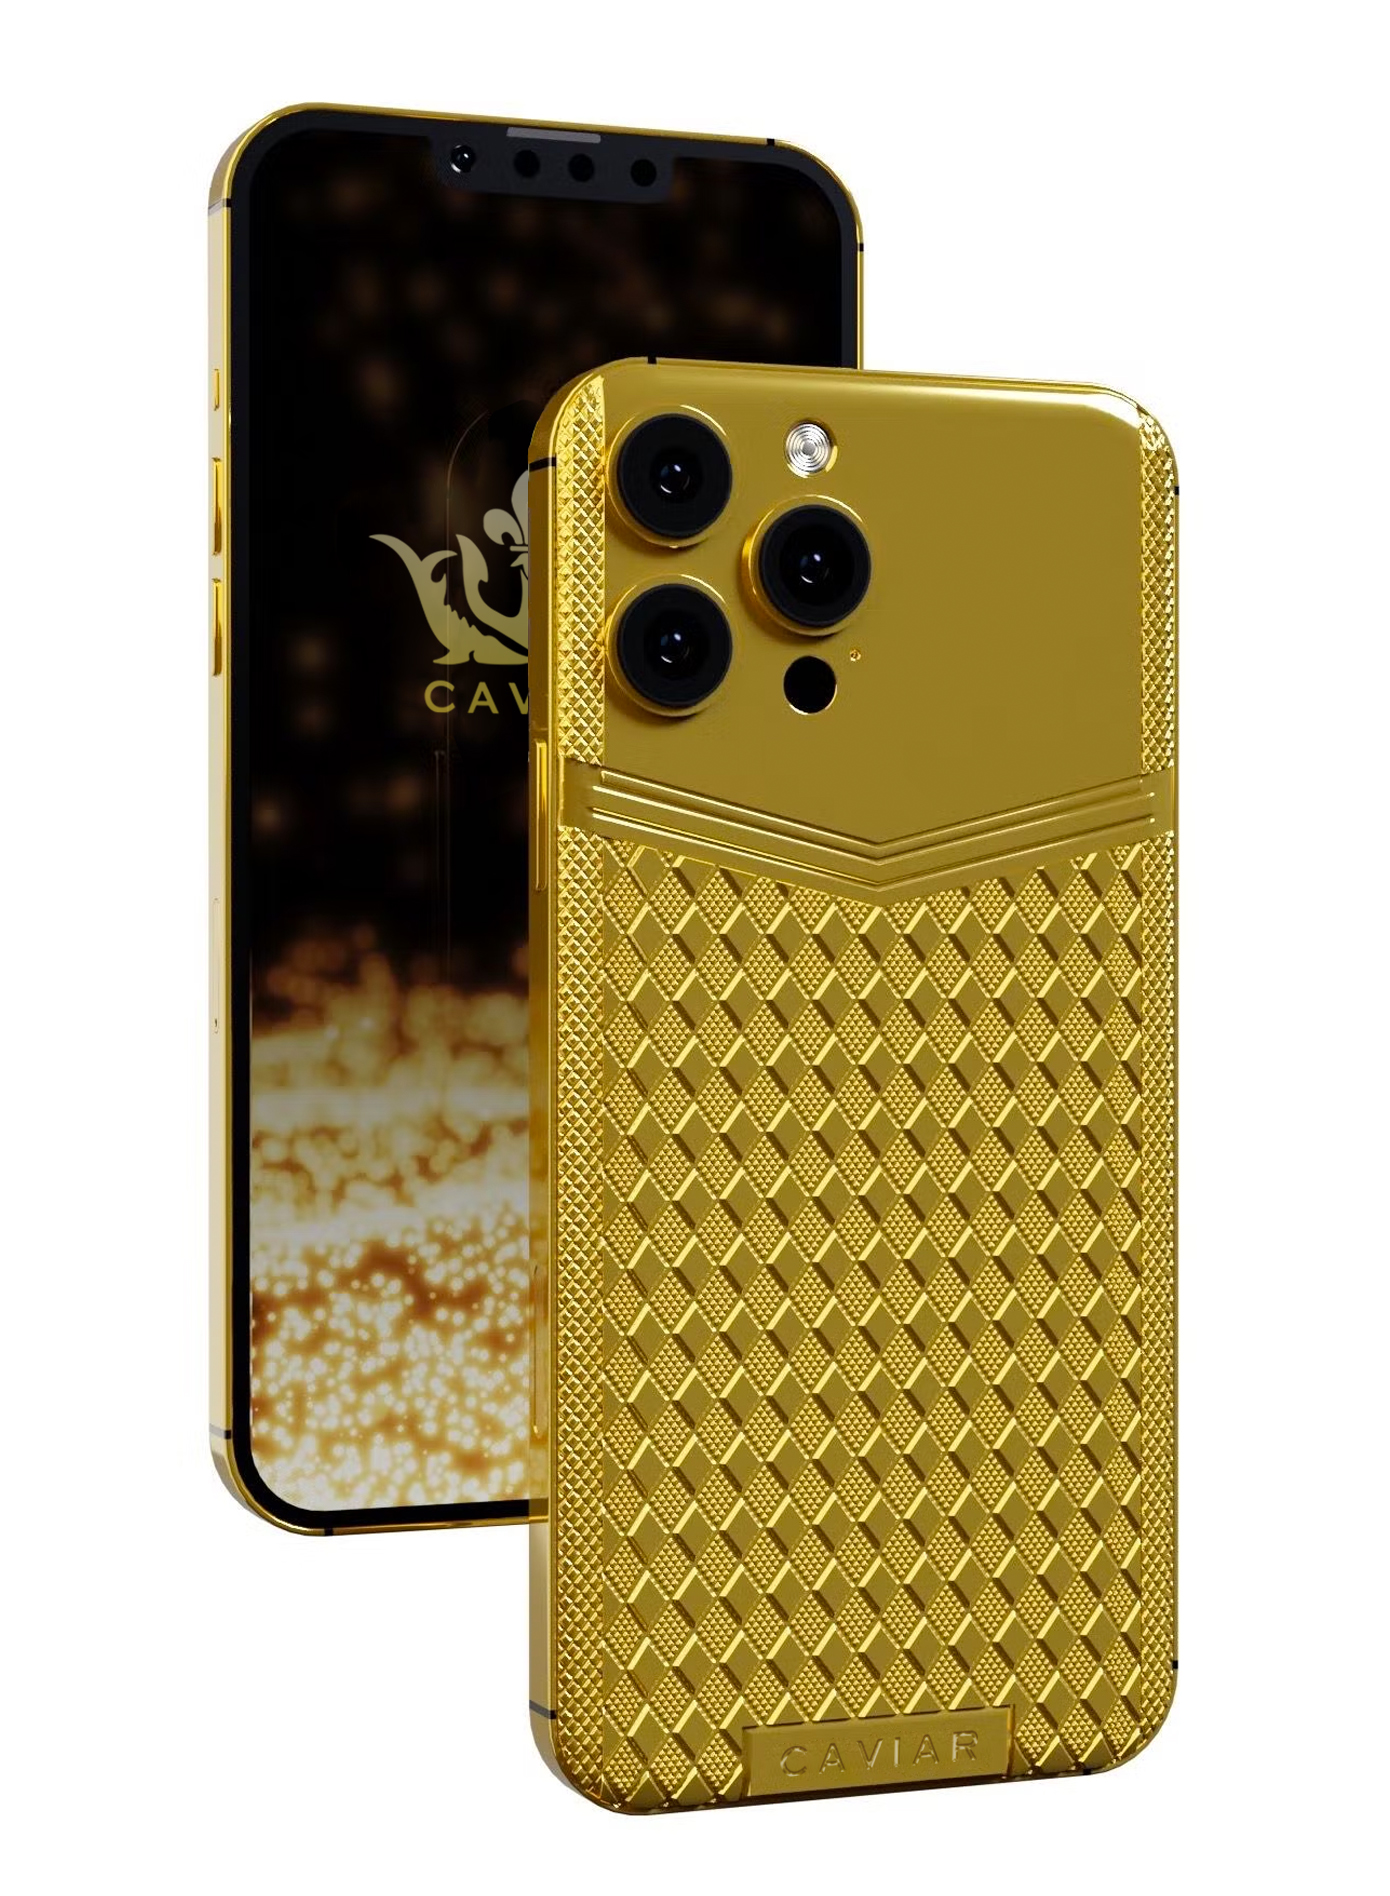 Caviar Luxury 24K Gold Customized iPhone 14 Pro Max Limited Edition 128 GB